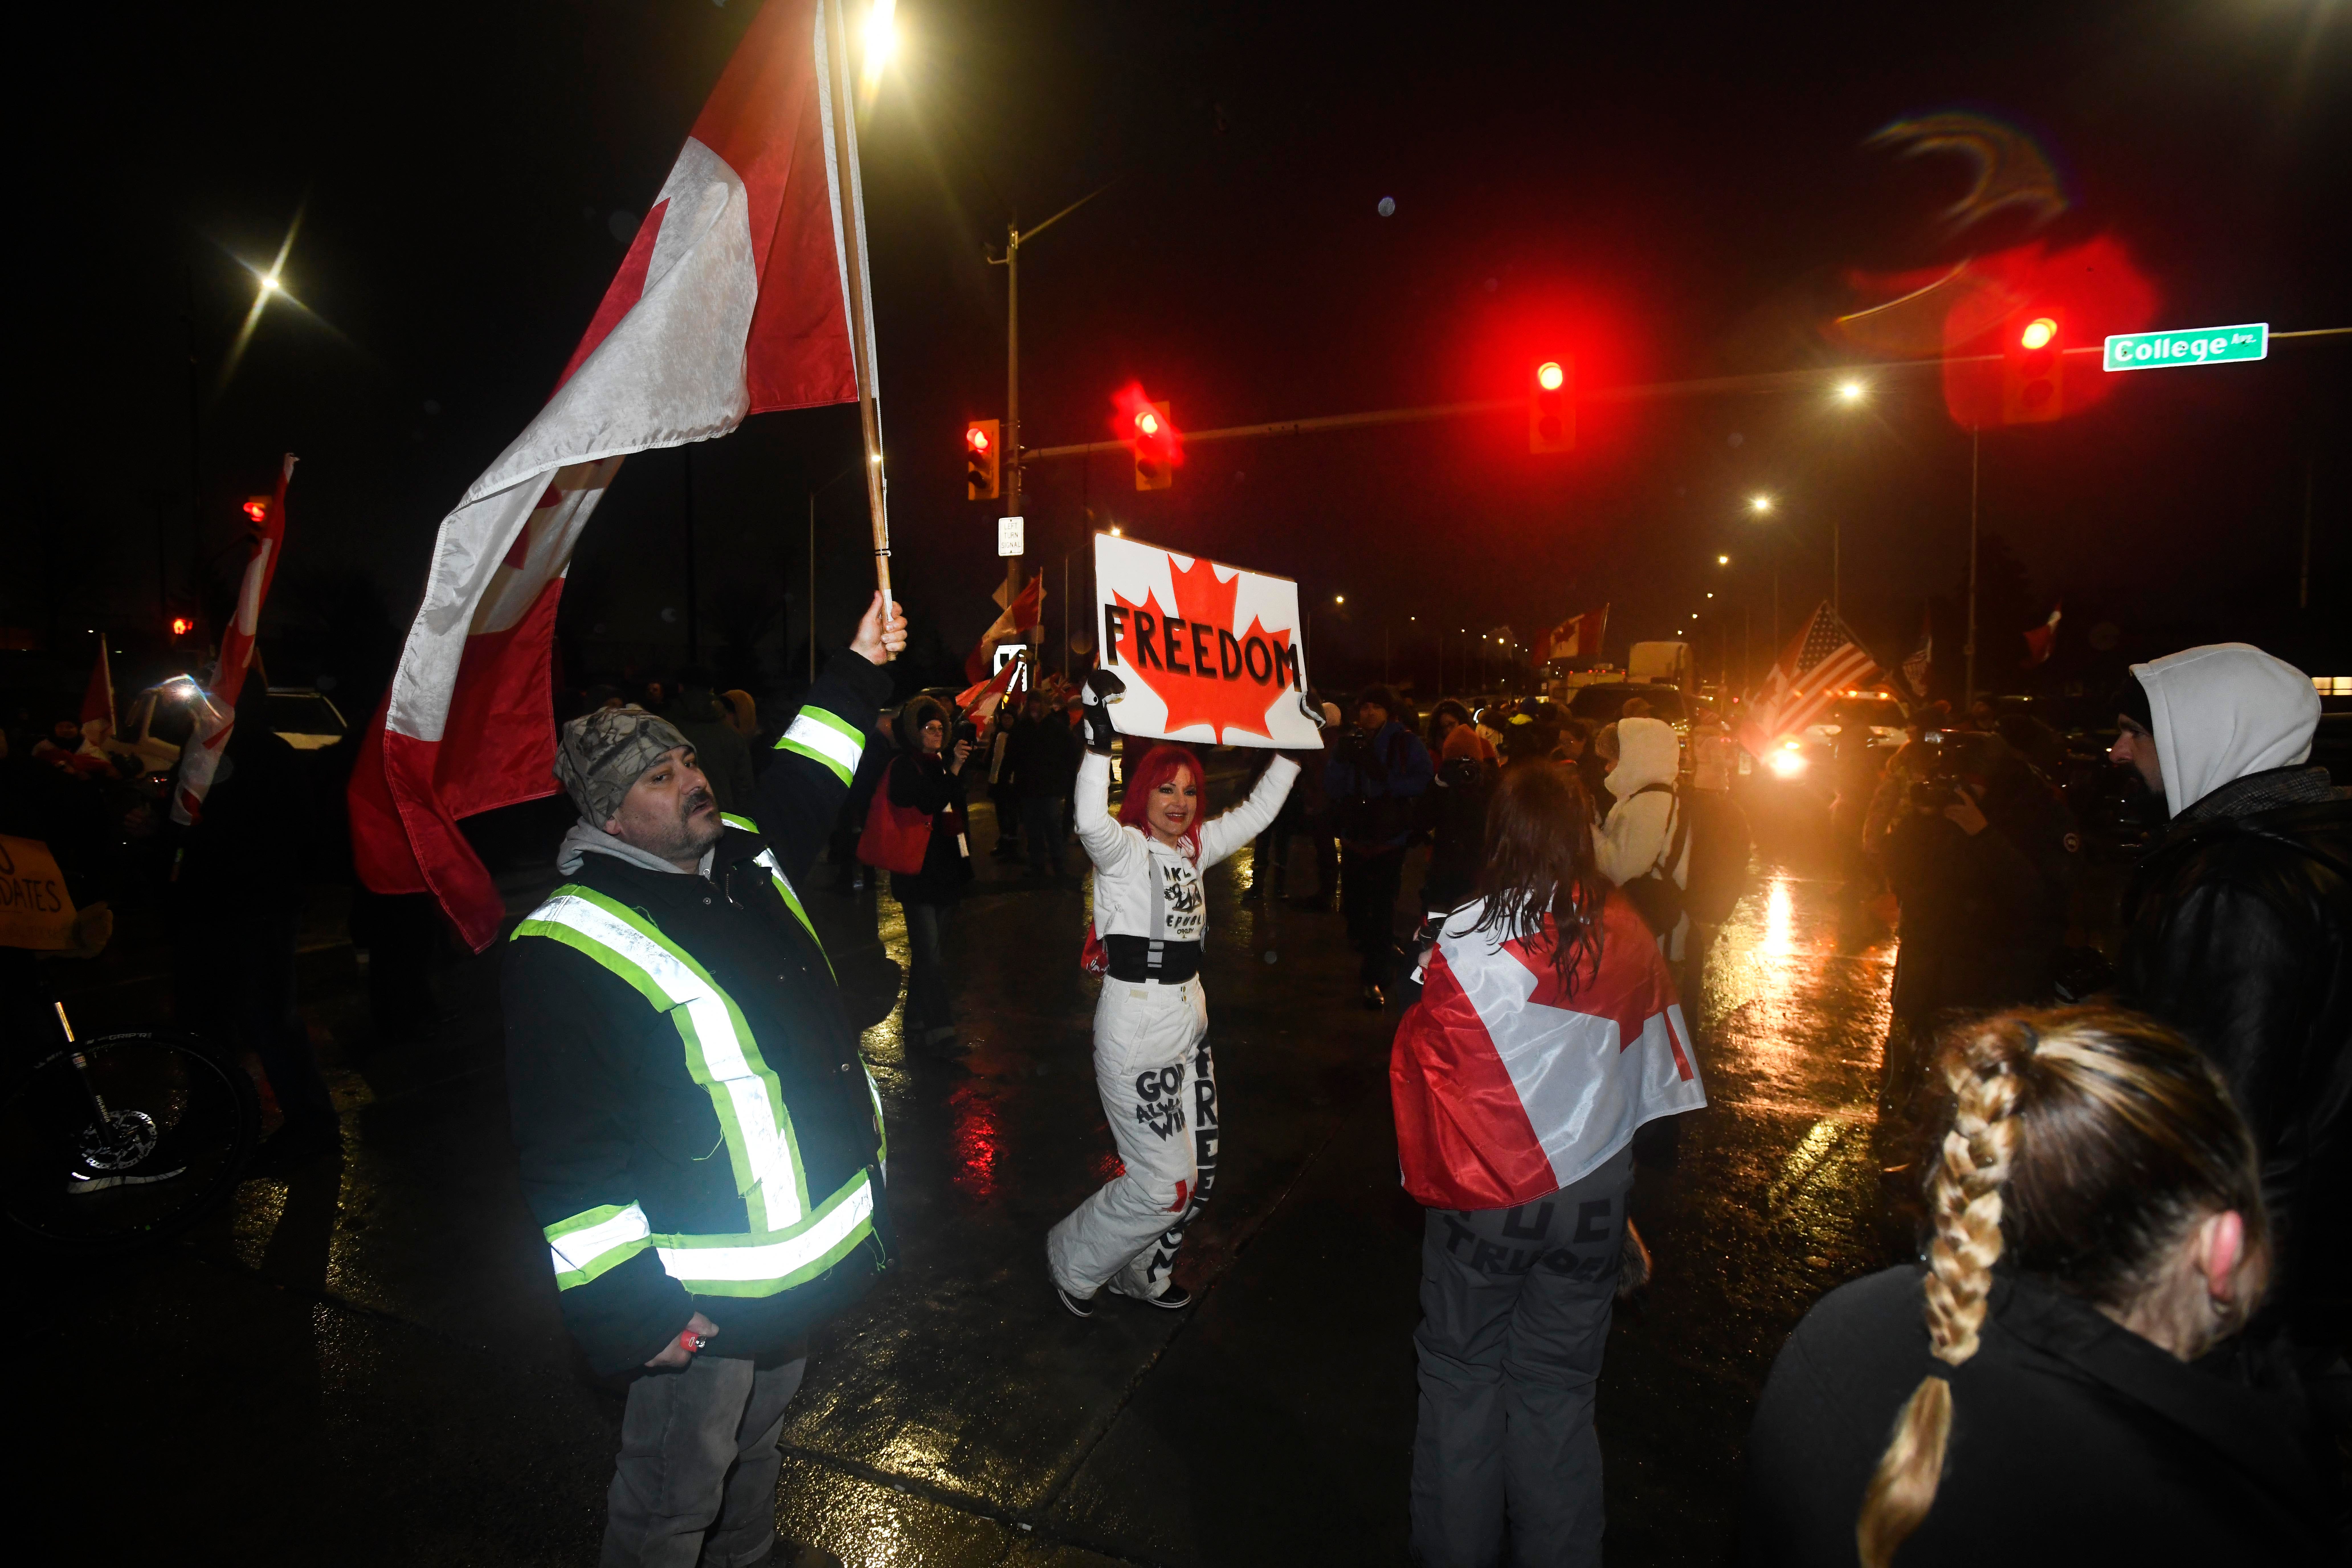 Protesters continue into the blockade in Windsor, Canada on February 11, 2022.